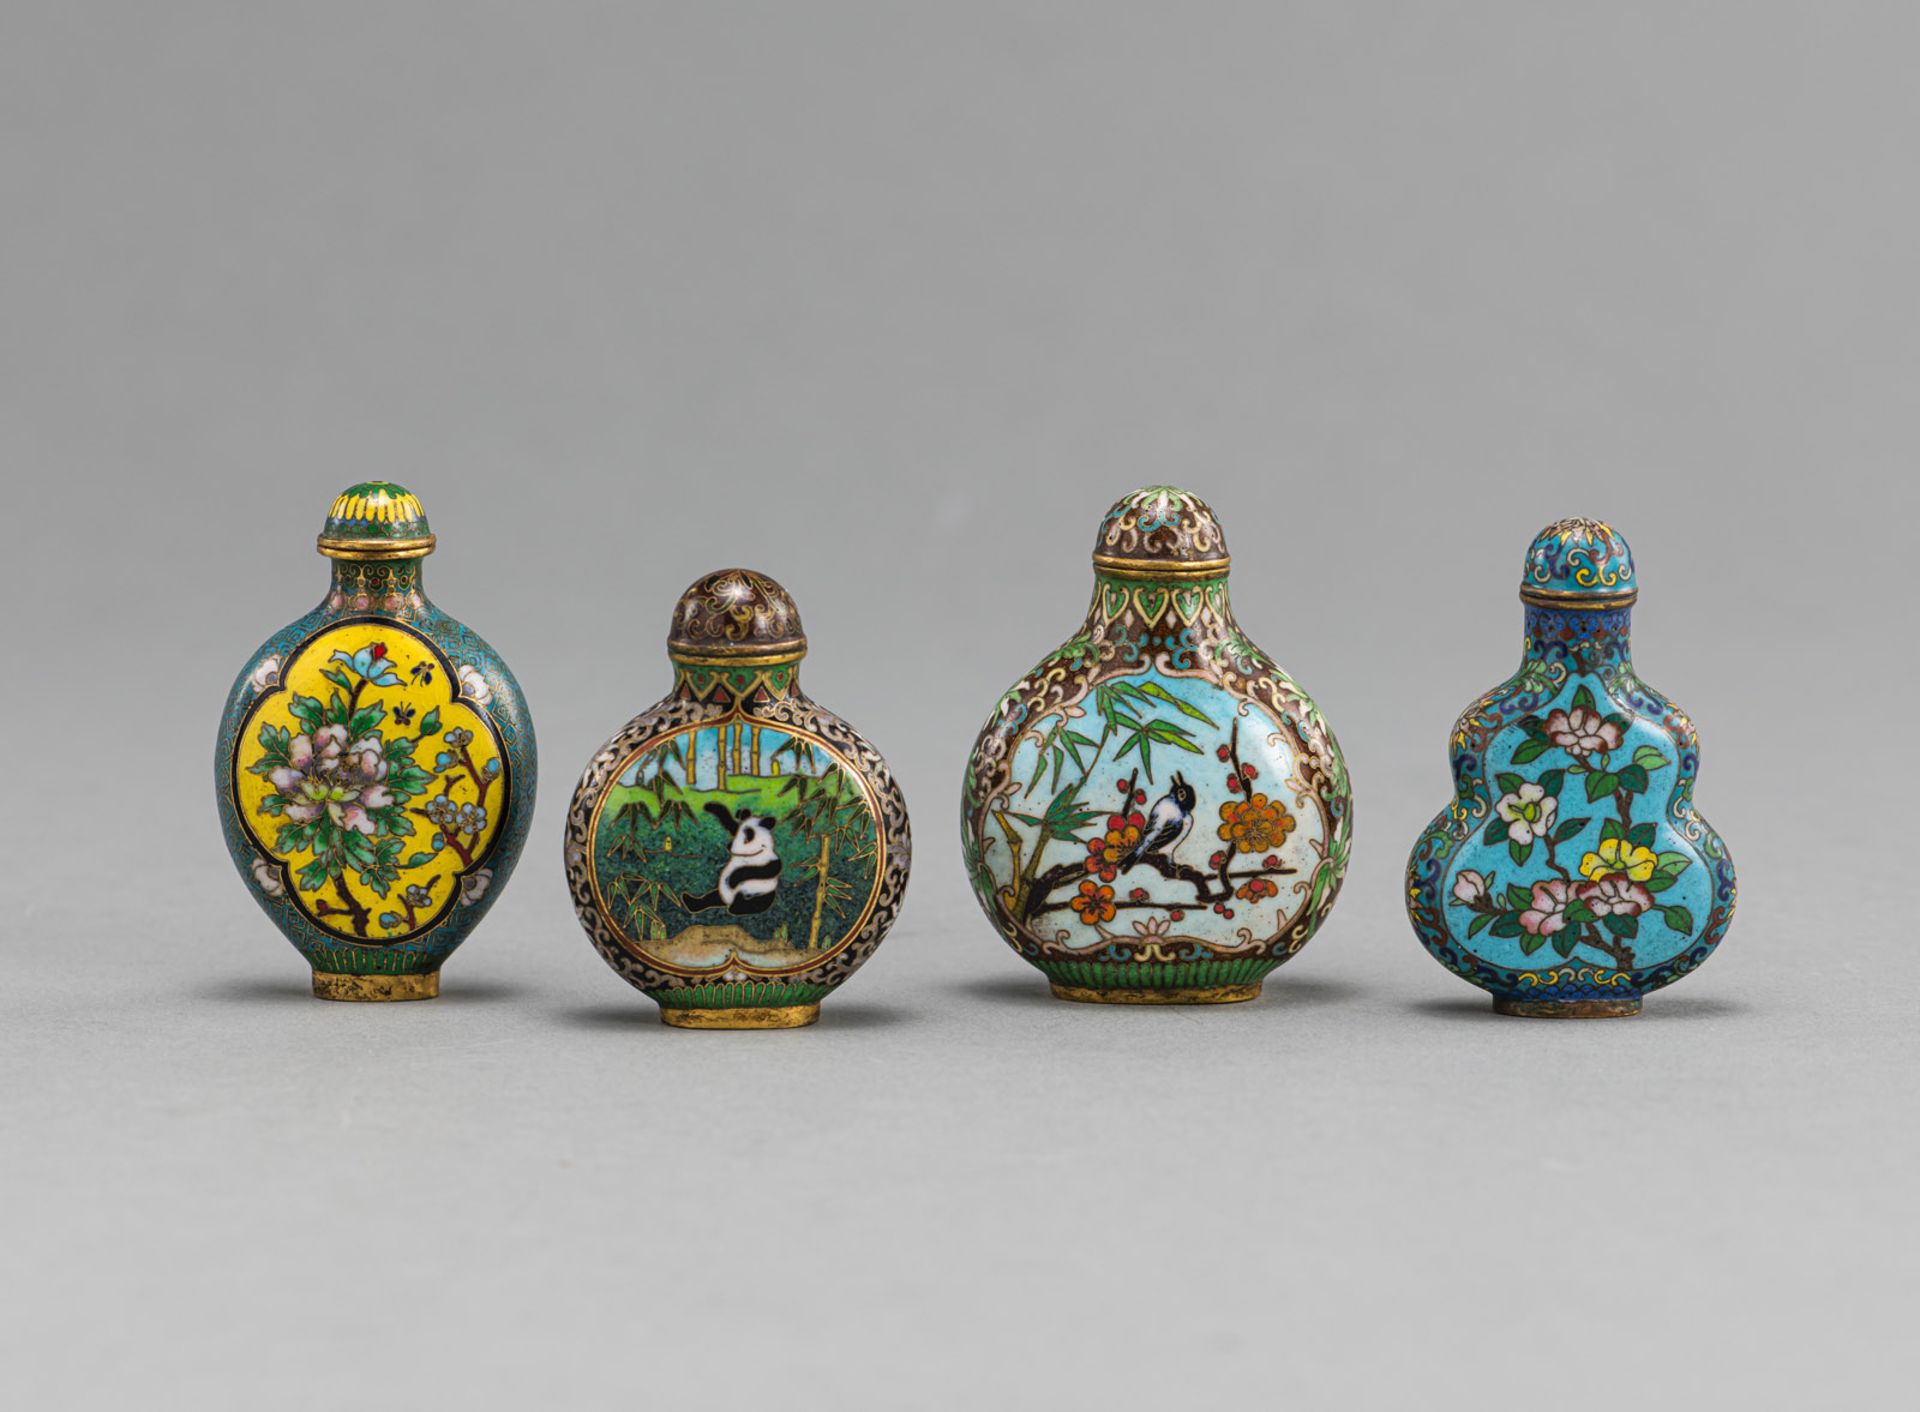 FOUR CLOISONNÉ SNUFFBOTTLES WITH DEPICTIONS OF FLOWERS AND ANIMALS